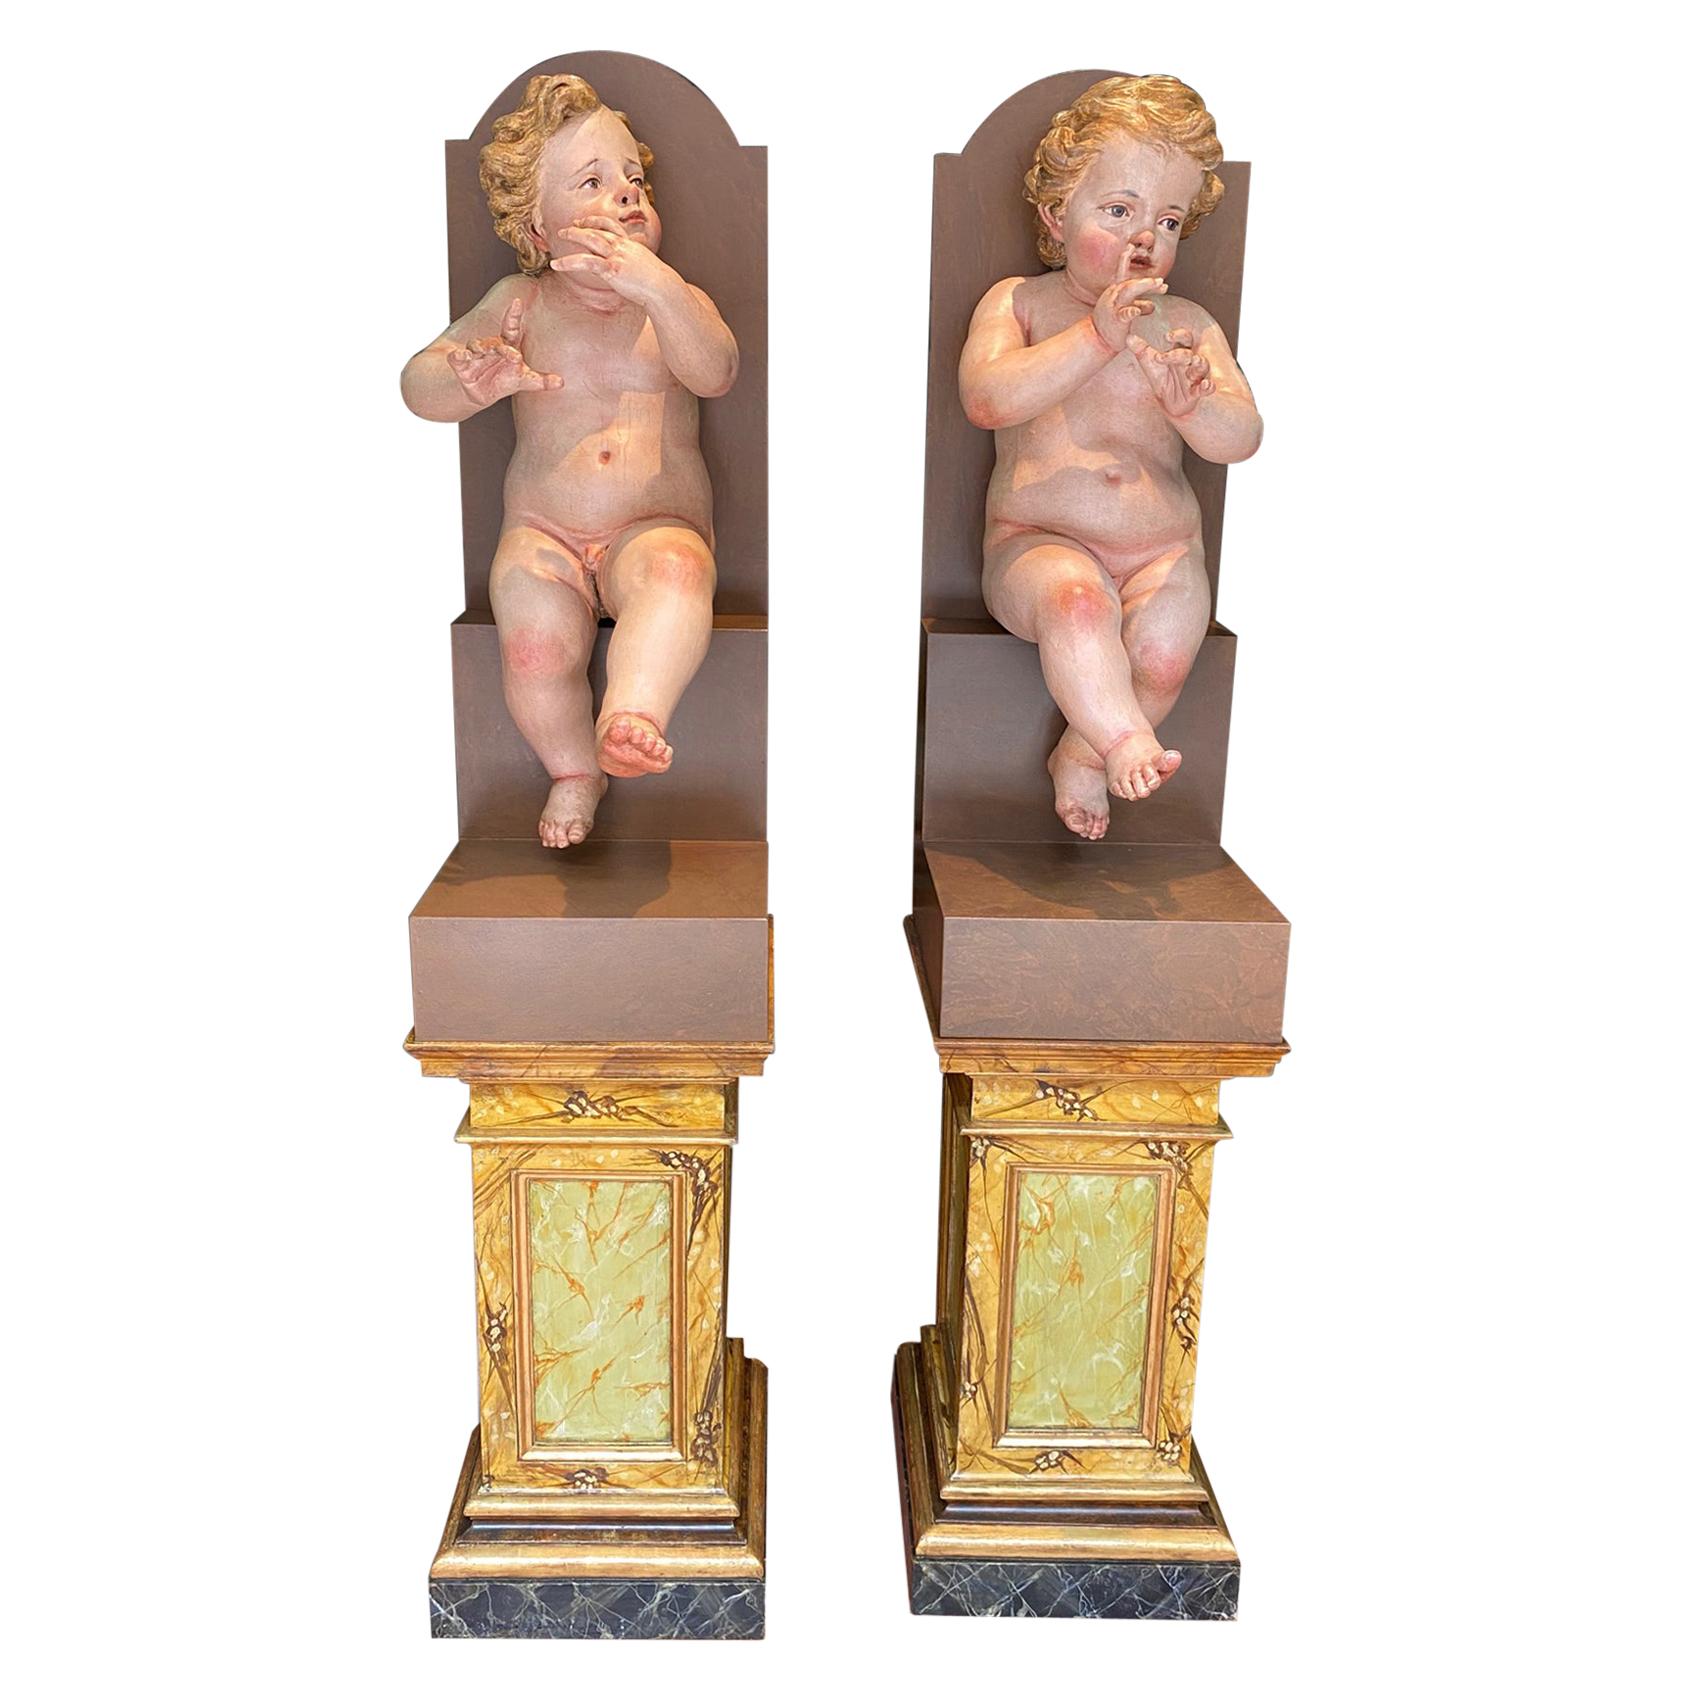 Pair of Children, Polychromed Pine Wood, Spain, 18th Century and Later